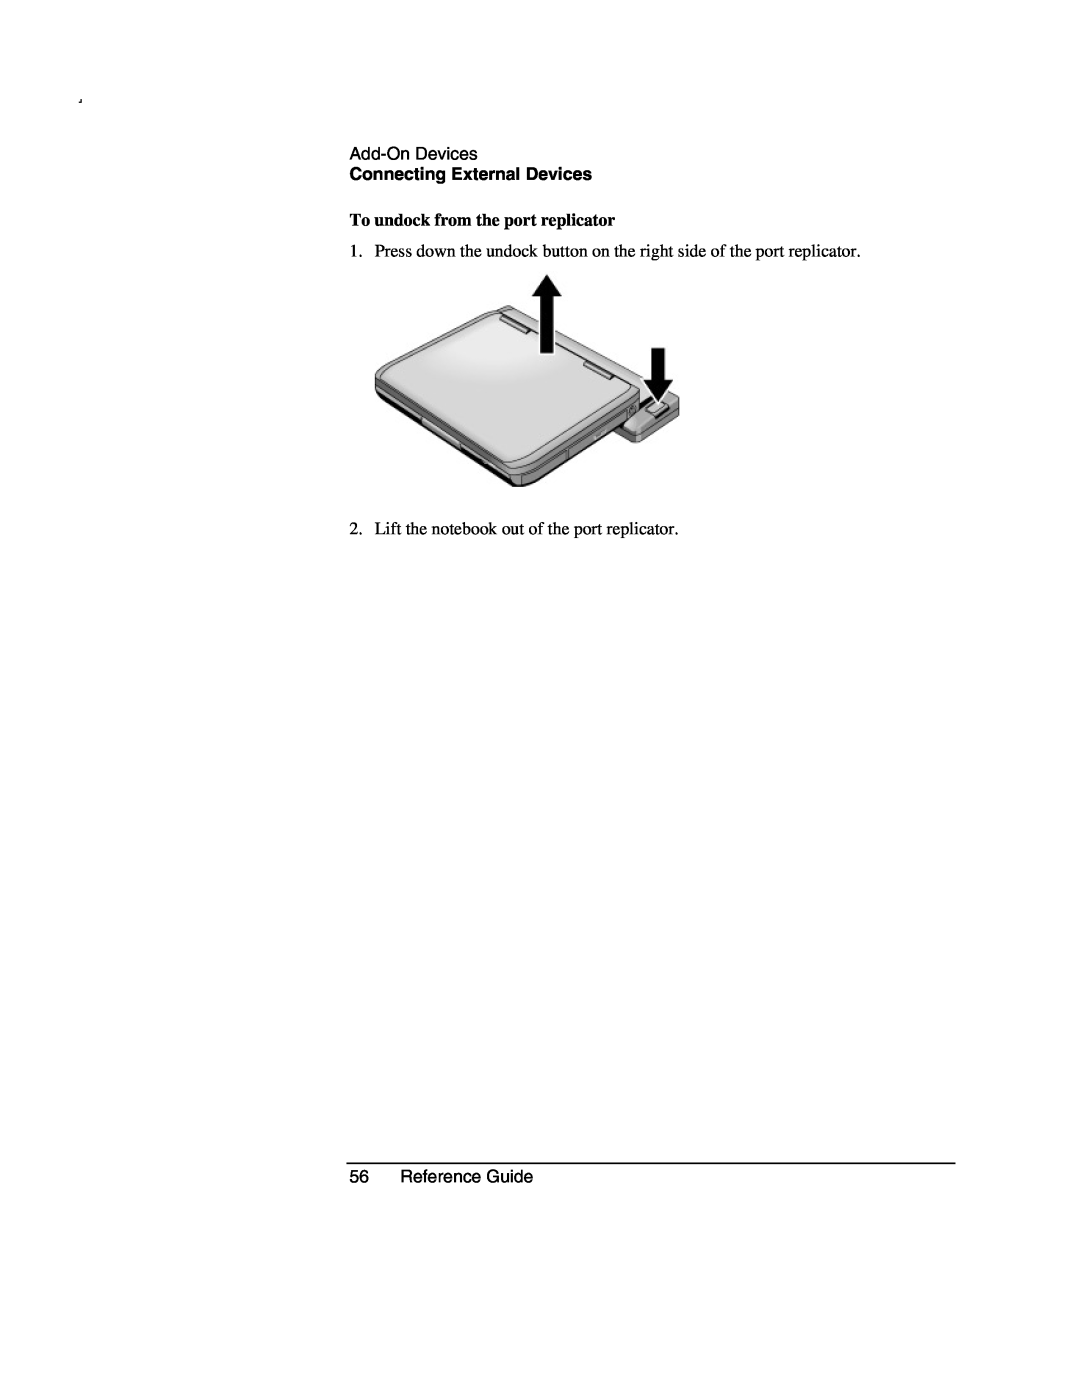 Compaq AMC20493-KT5 manual To undock from the port replicator, Reference Guide, Add-On Devices, Connecting External Devices 